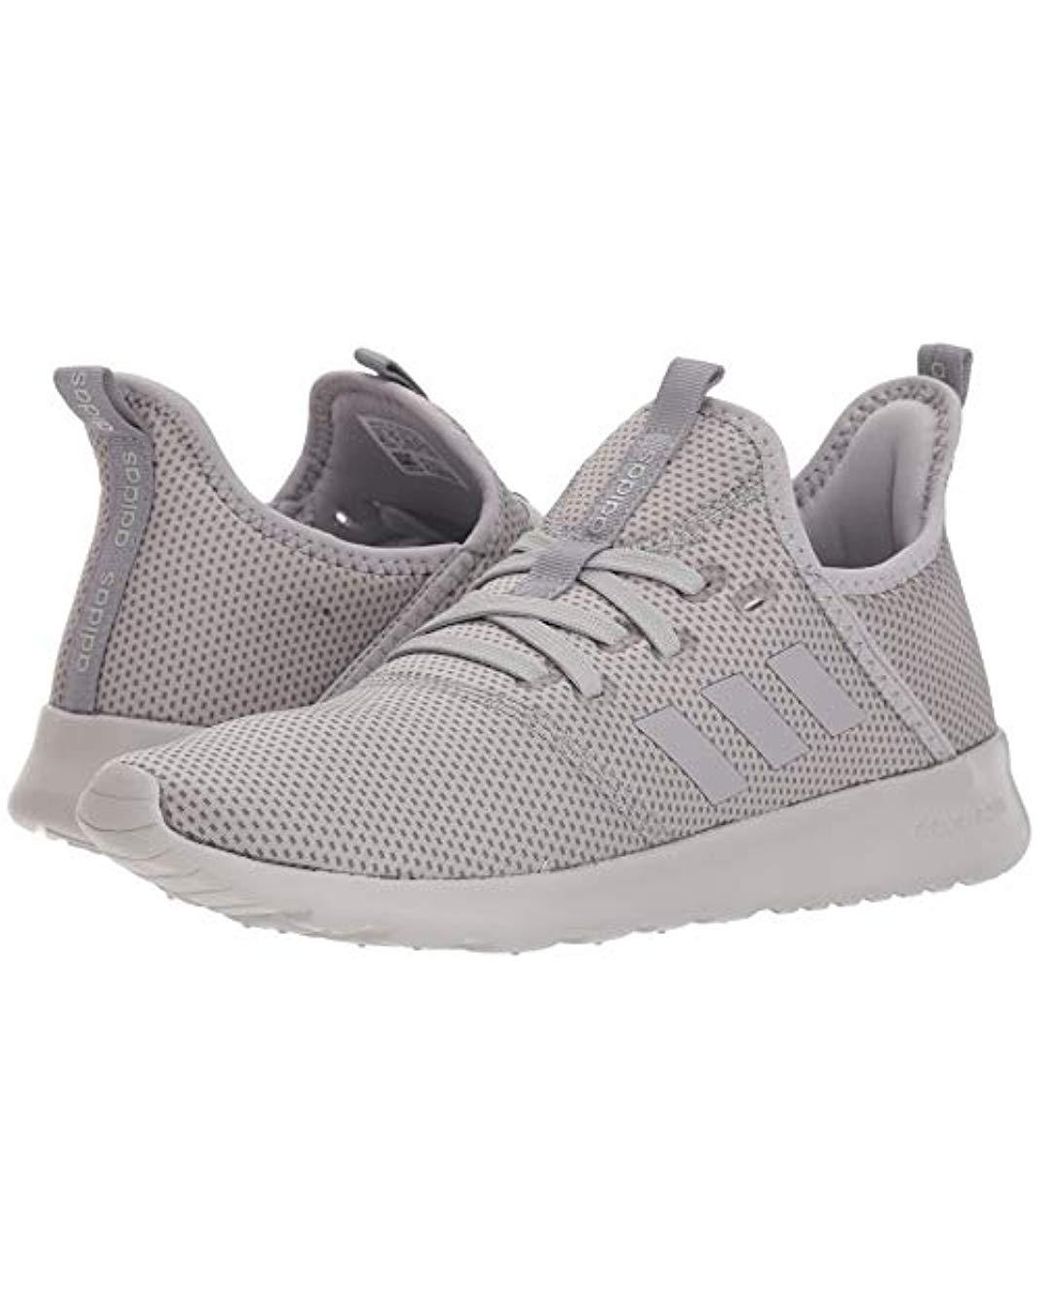 adidas Cloudfoam Pure Running Shoe in Gray | Lyst